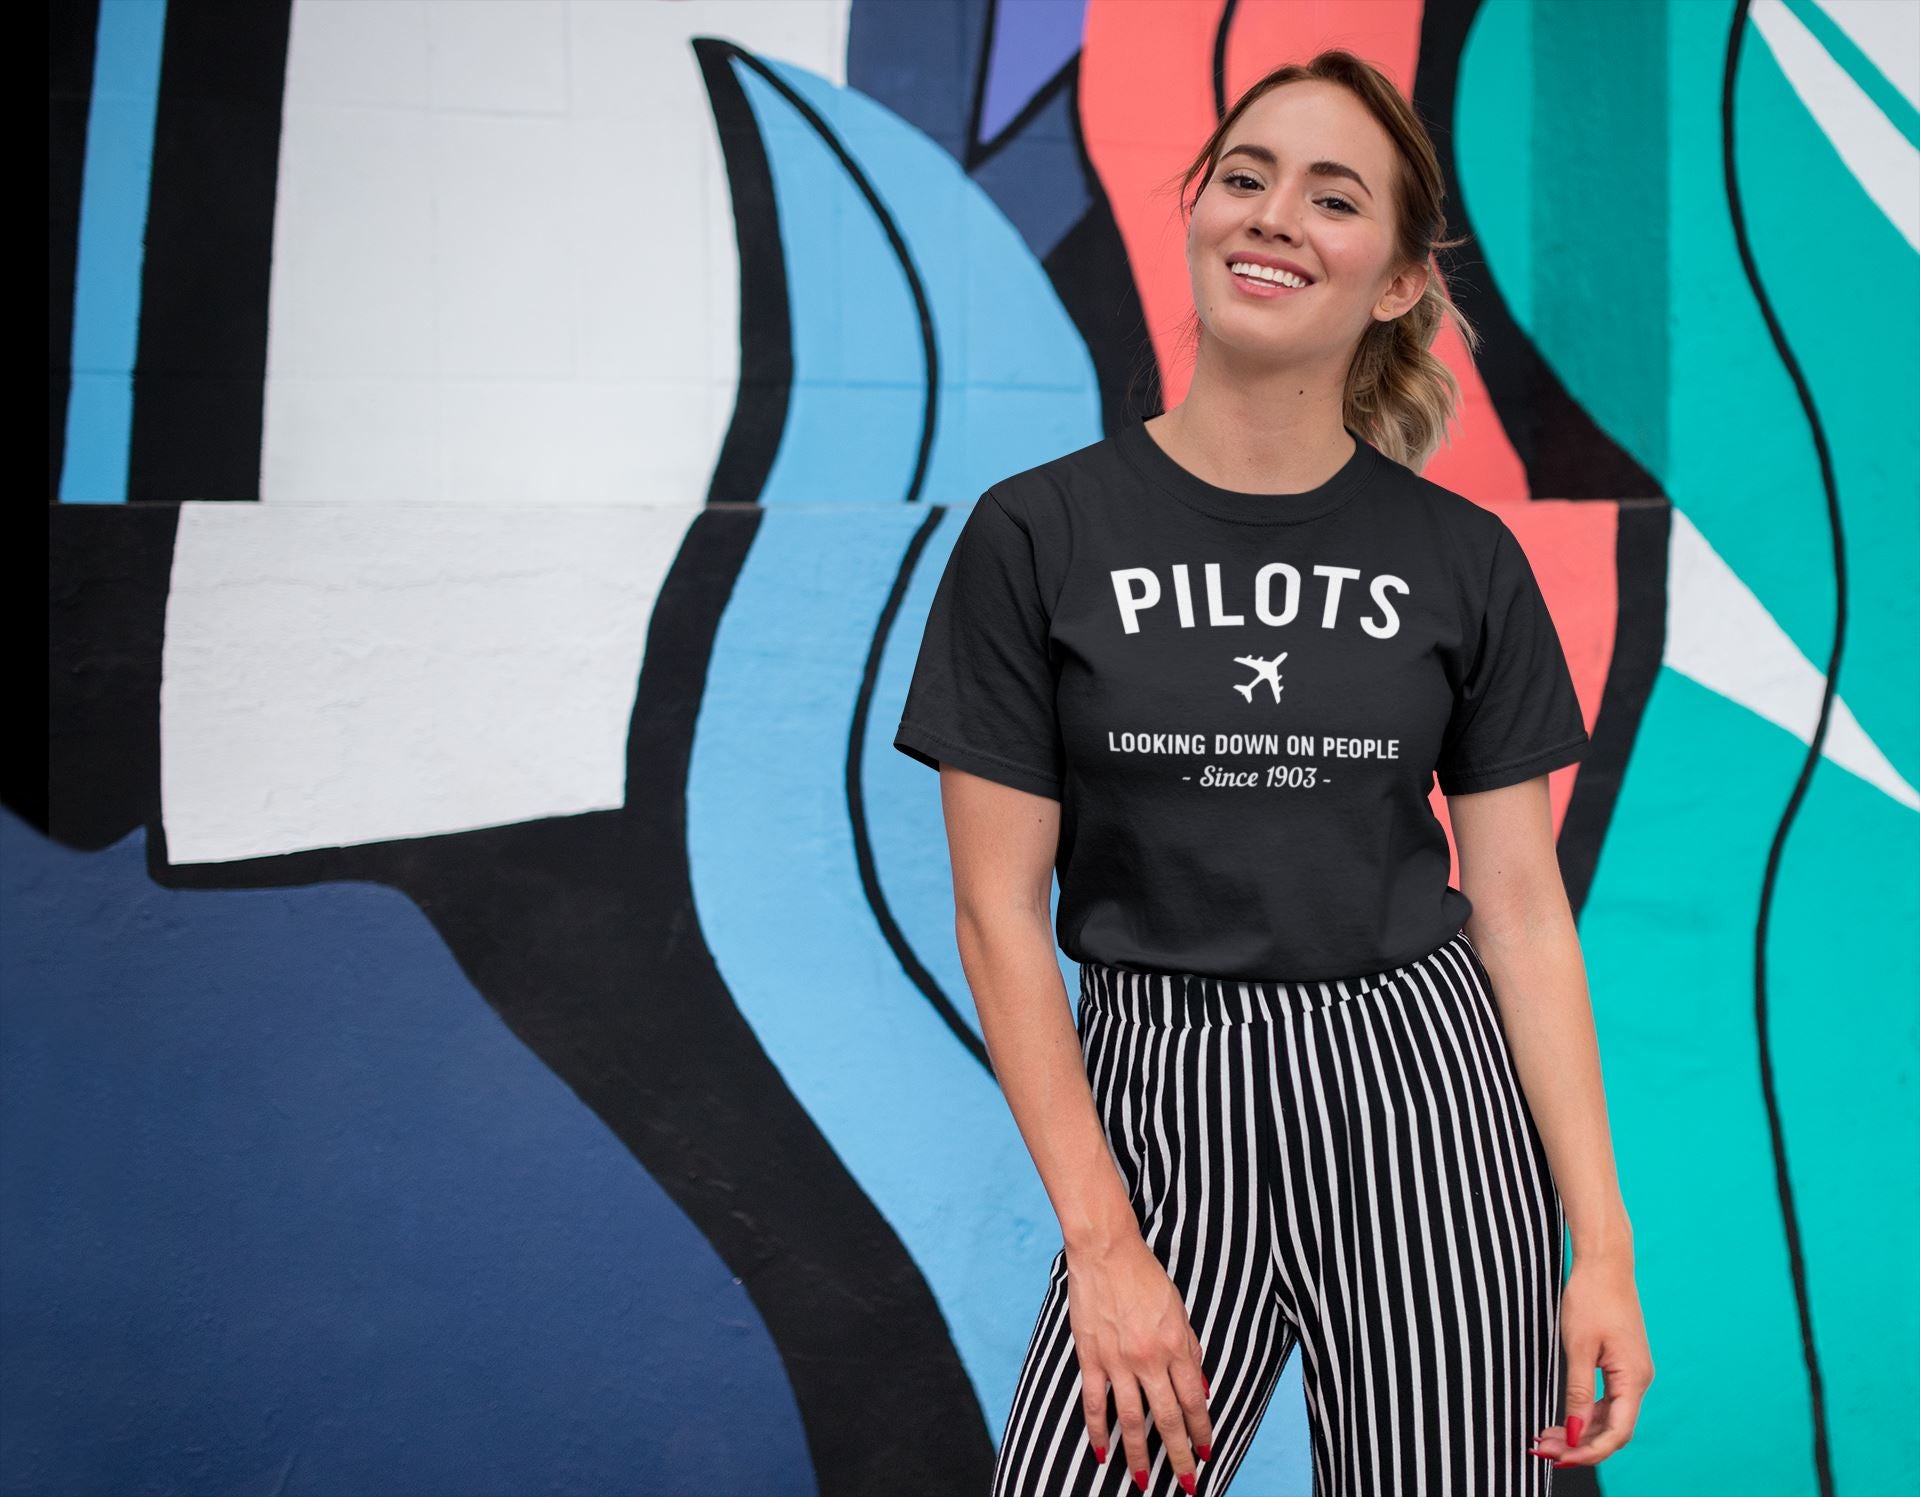 Pilots Looking Down on People Since 1903 Exclusive Navy Blue T Shirt for Men and Women Printrove 